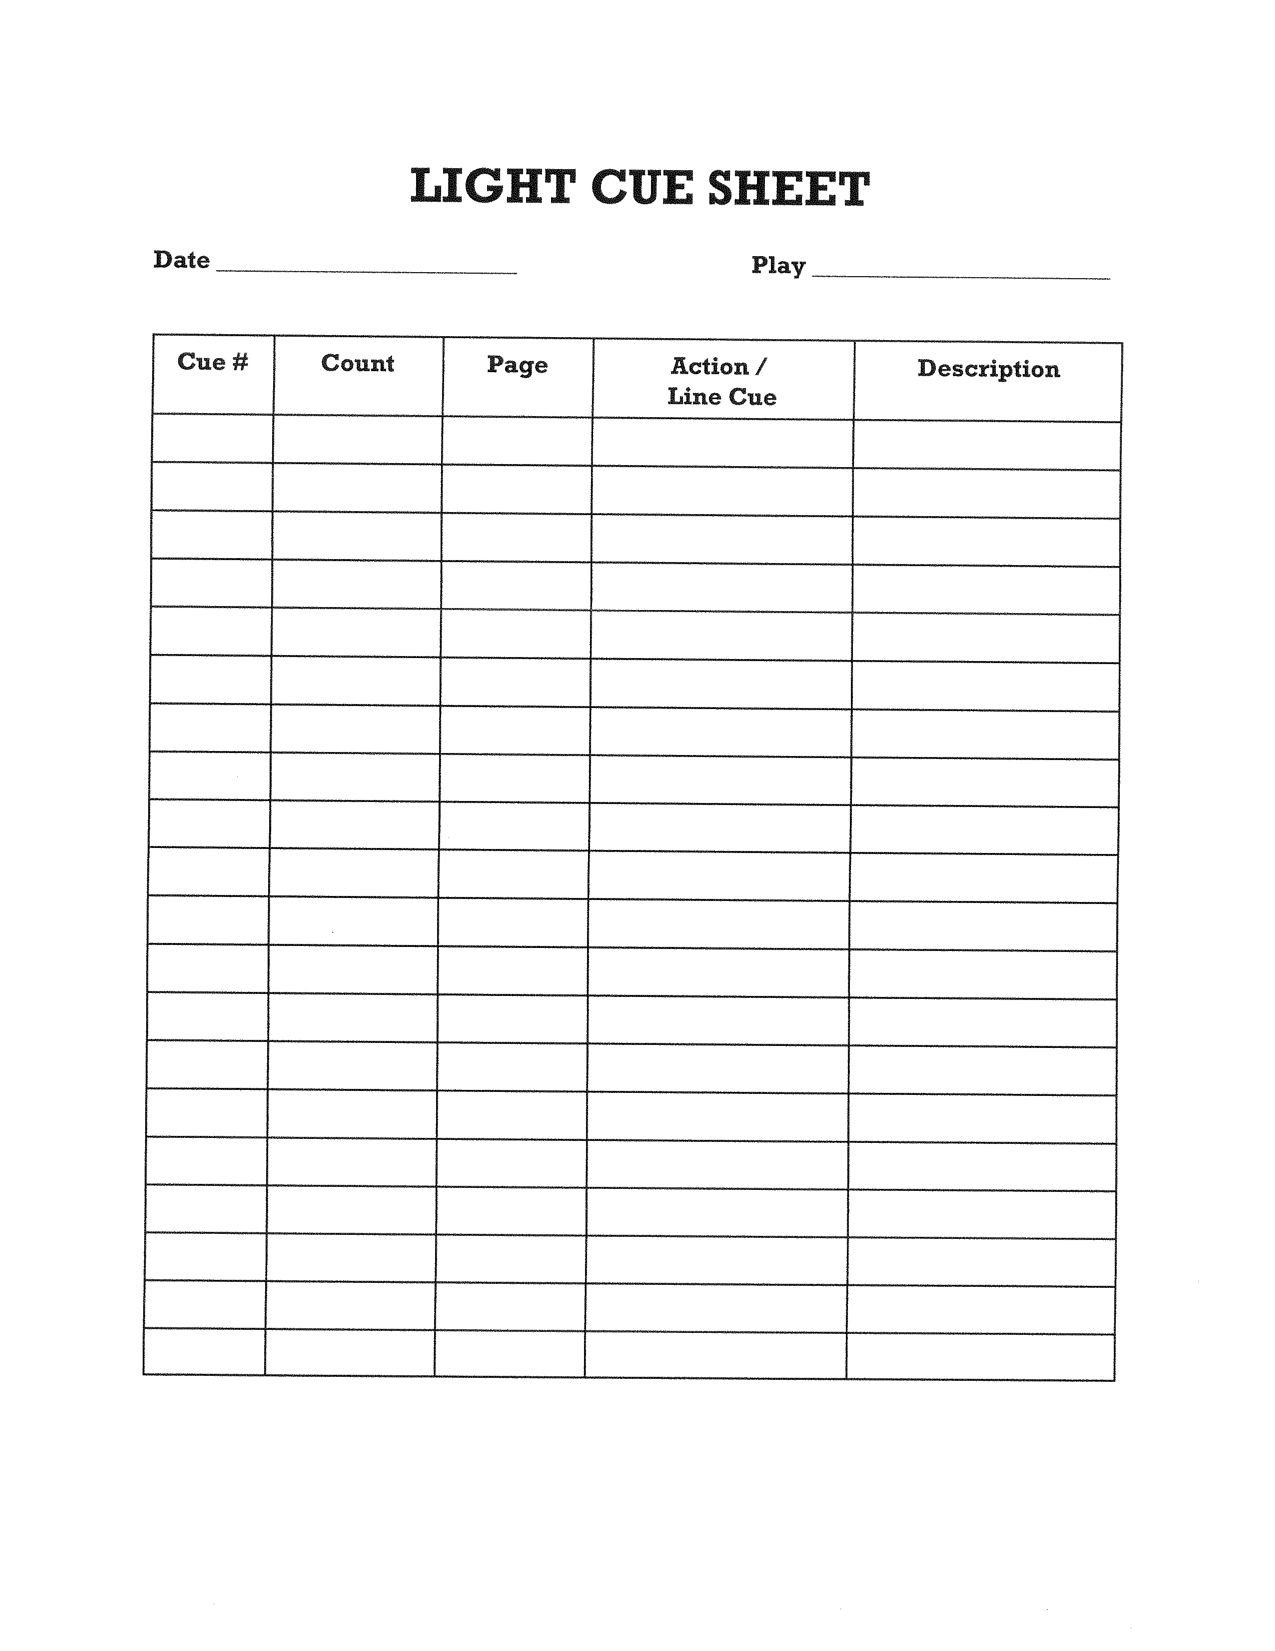 Sound Cue Sheet Template Simple Lighting Cue Sheet for Students